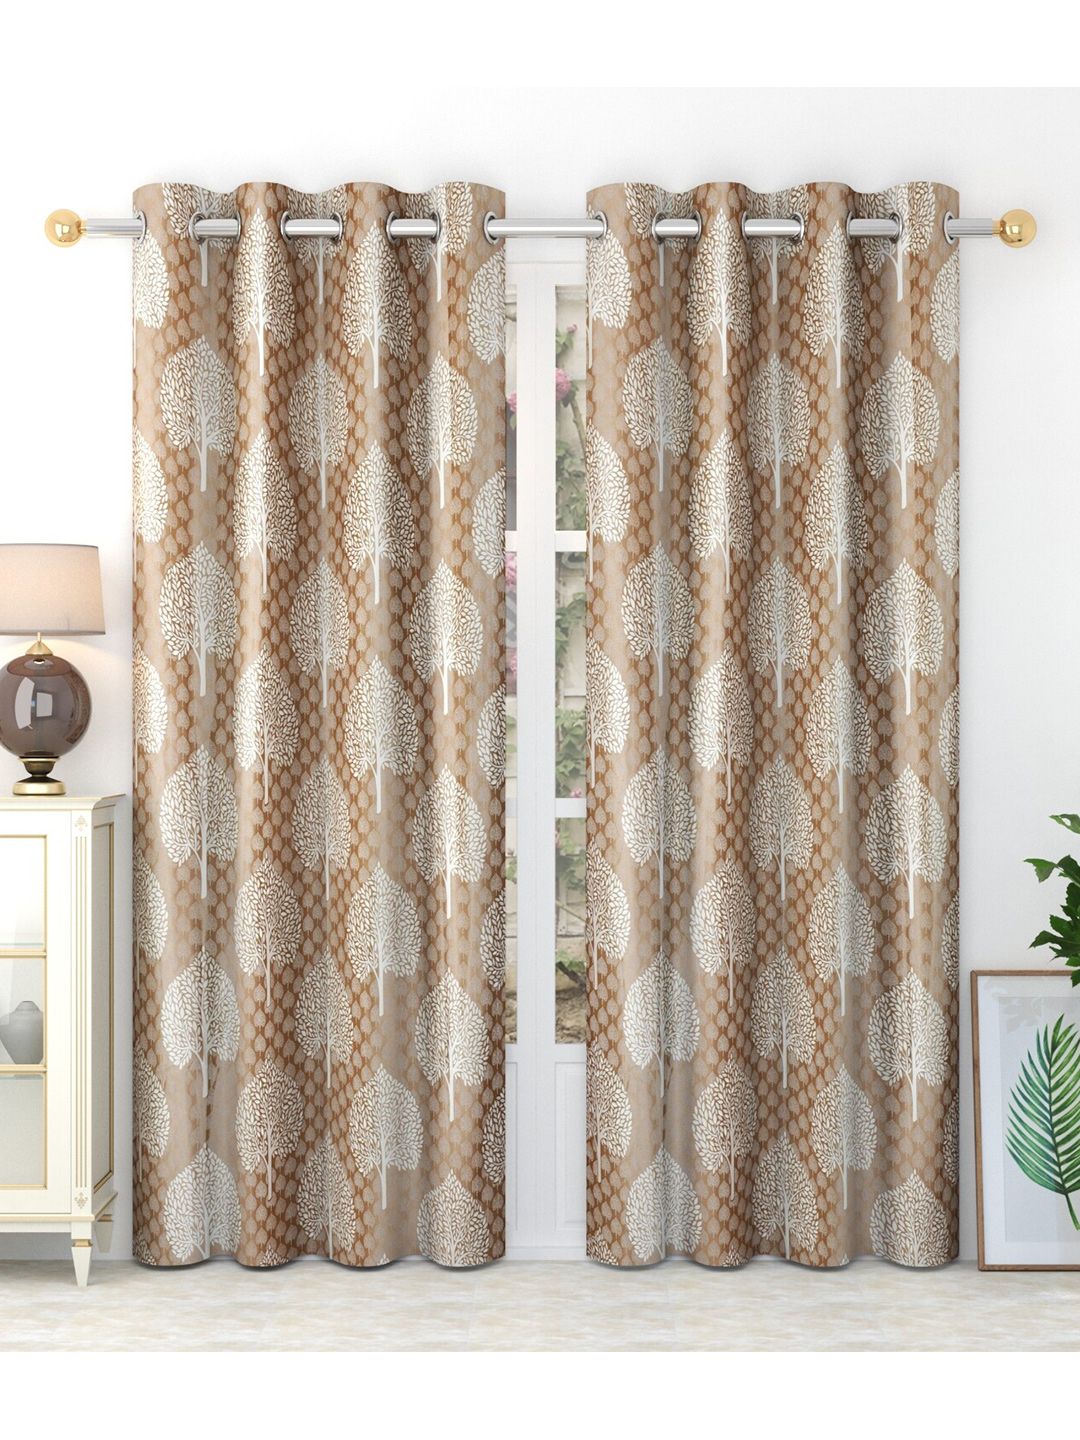 MULTITEX Brown & White Set of 2 Floral Door Curtain Price in India